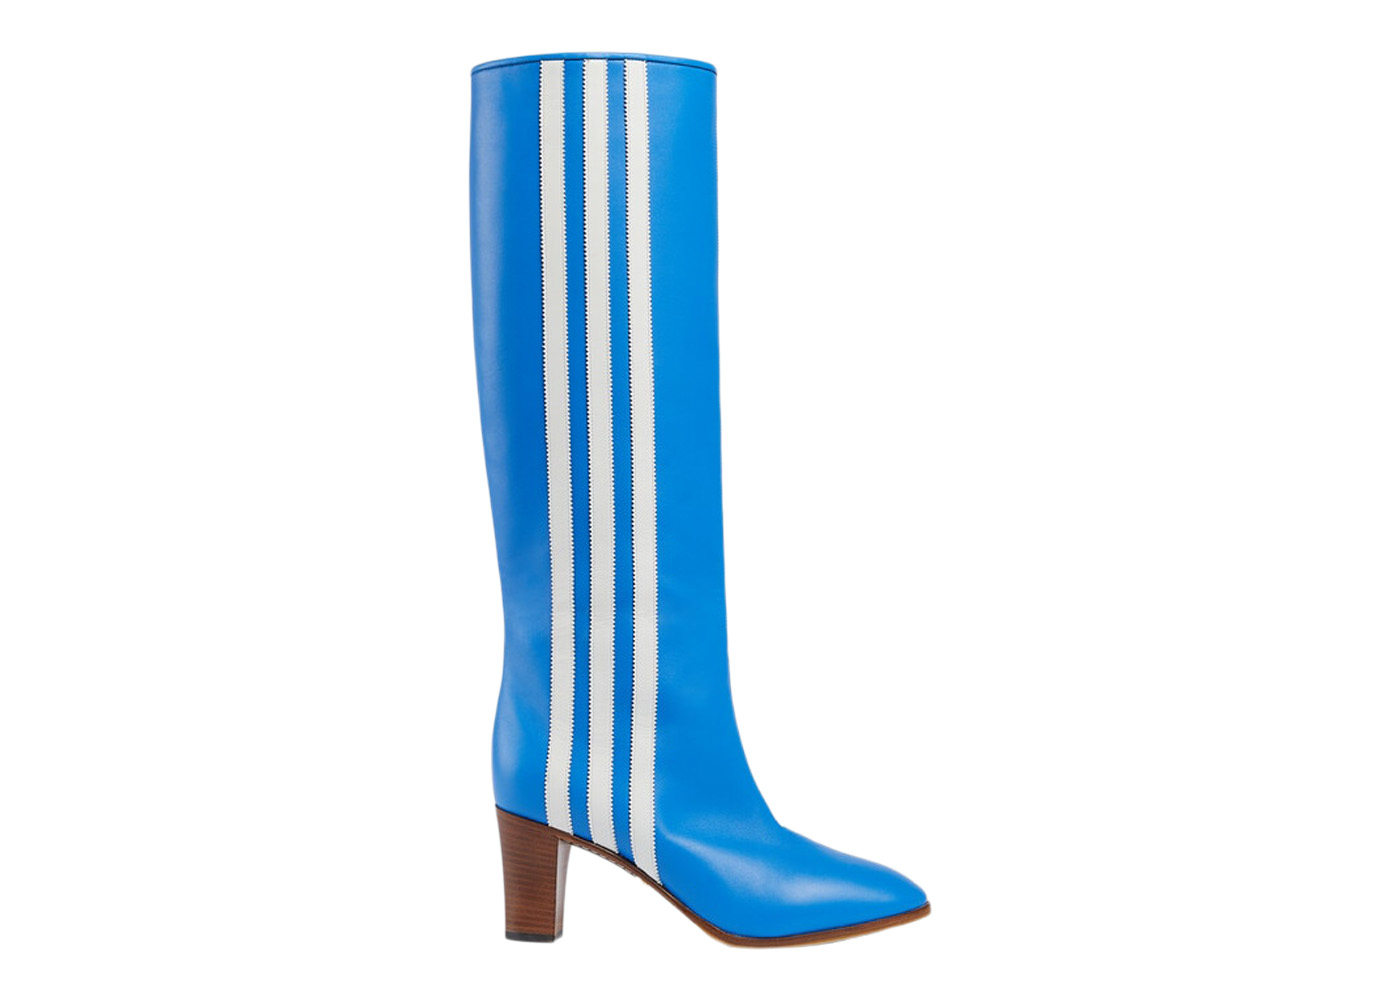 adidas x Gucci 73mm Knee-High Boots Bright Blue Leather - 715584 